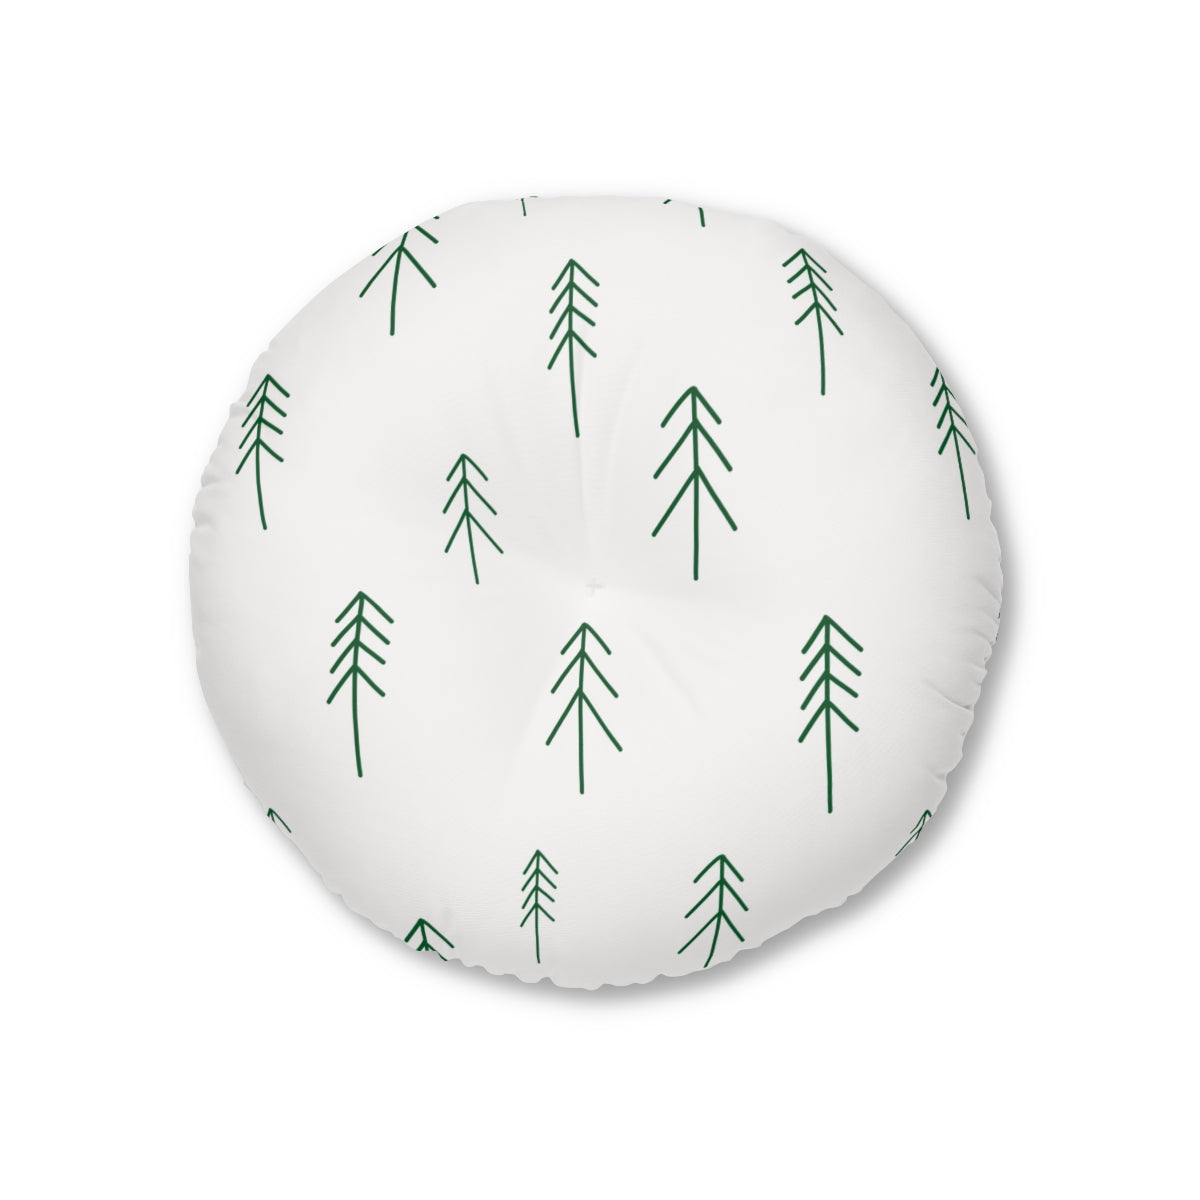 Lifestyle Details - White Round Tufted Holiday Floor Pillow - Evergreen Trees - 26x26 - Front View